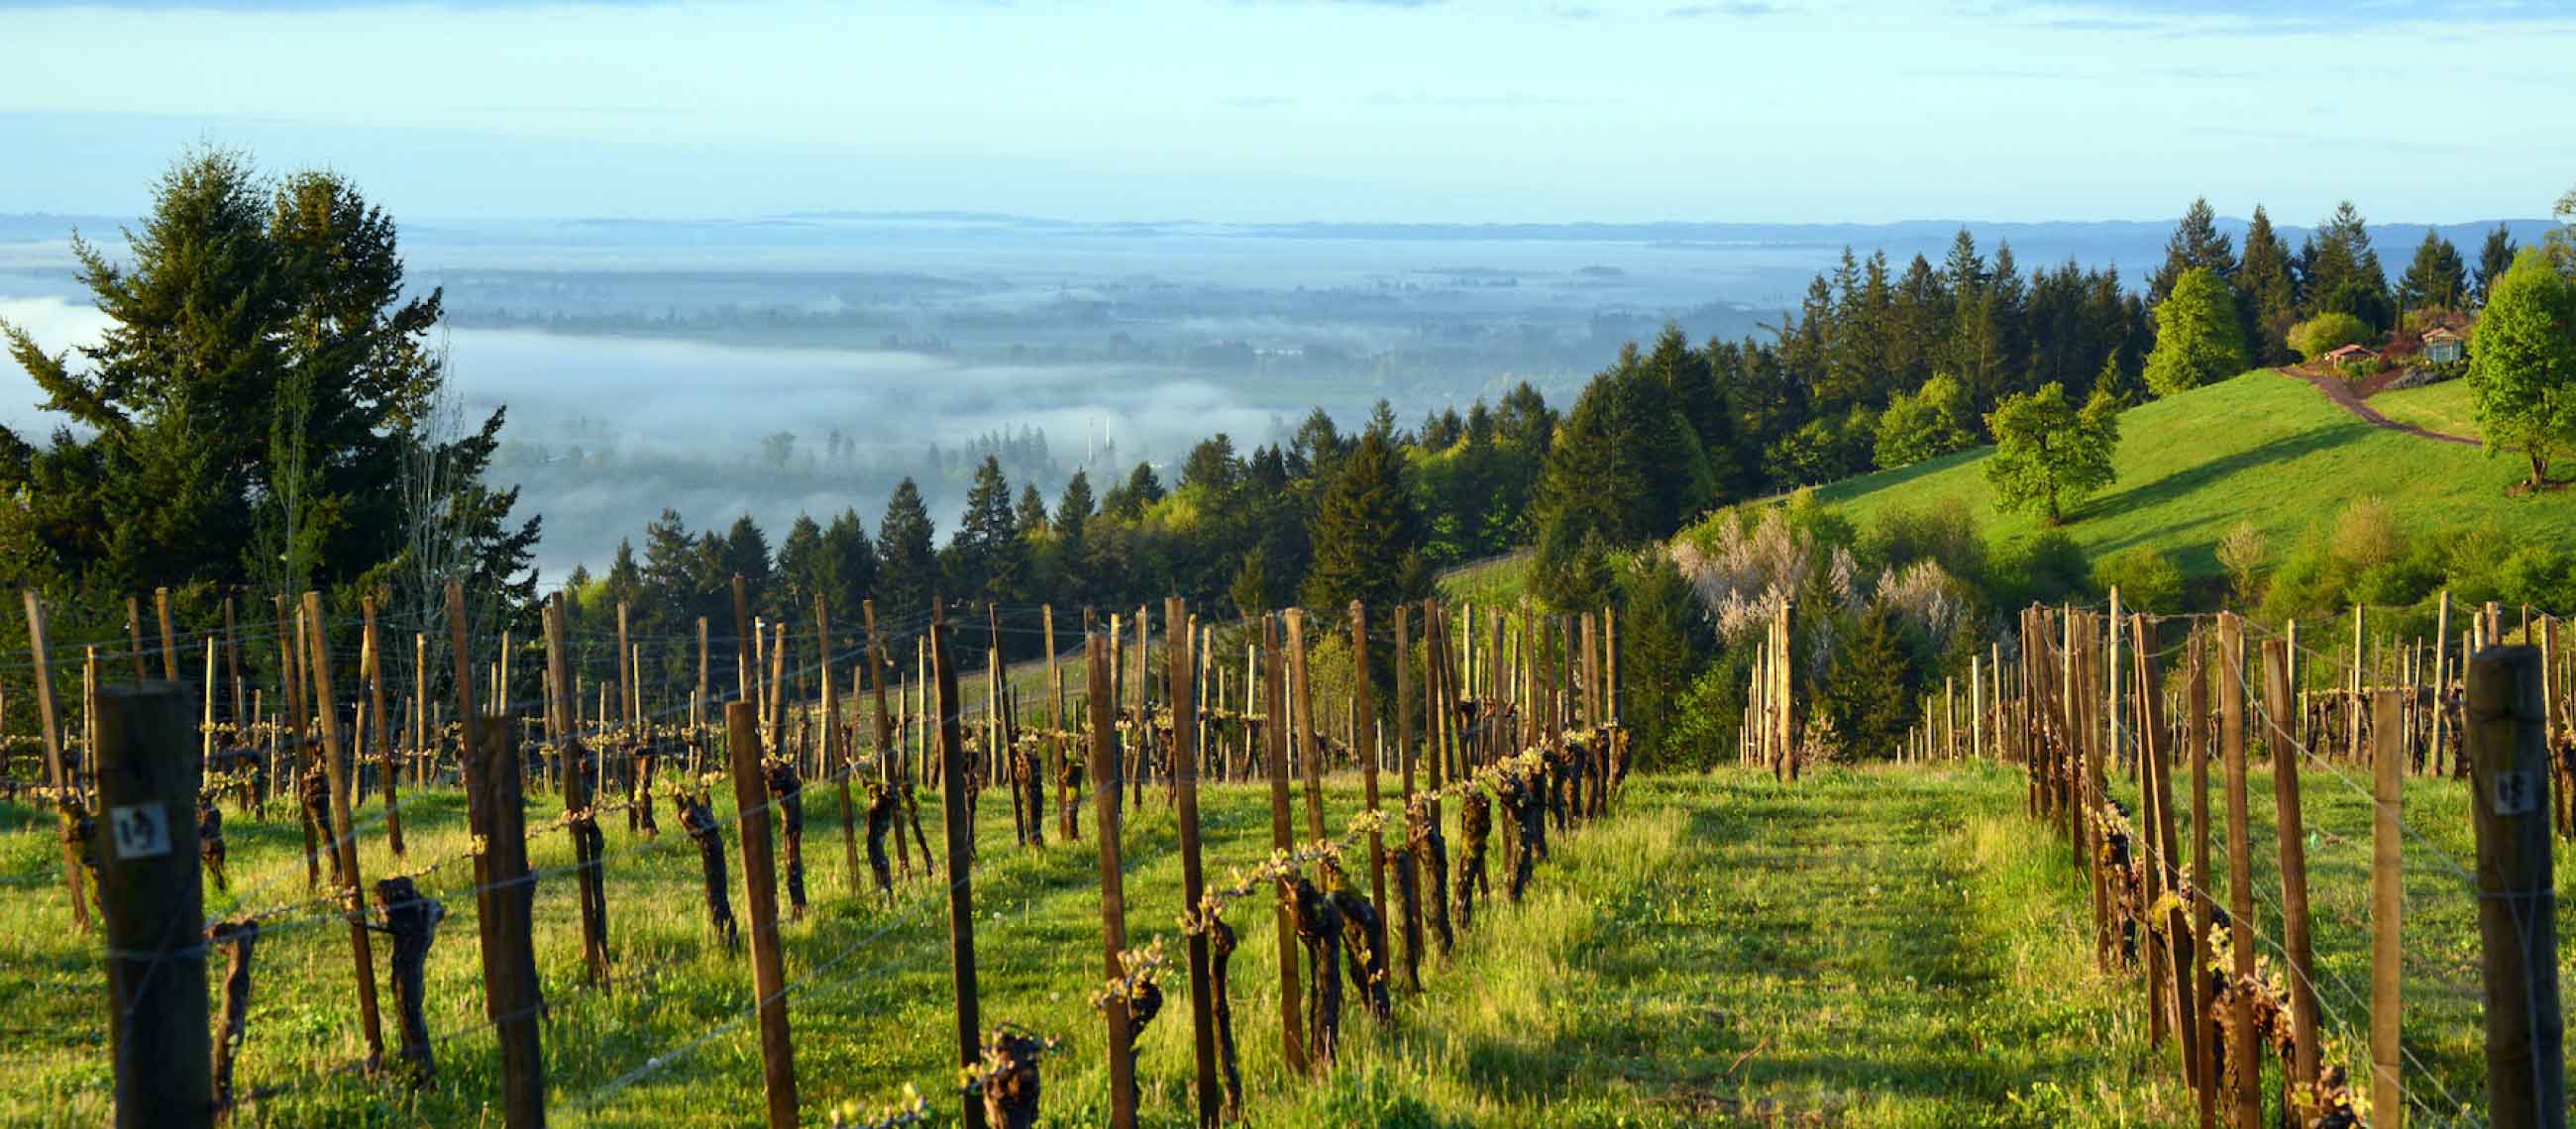 The Eyrie Vineyards: Pioneers of Dueling Pinots